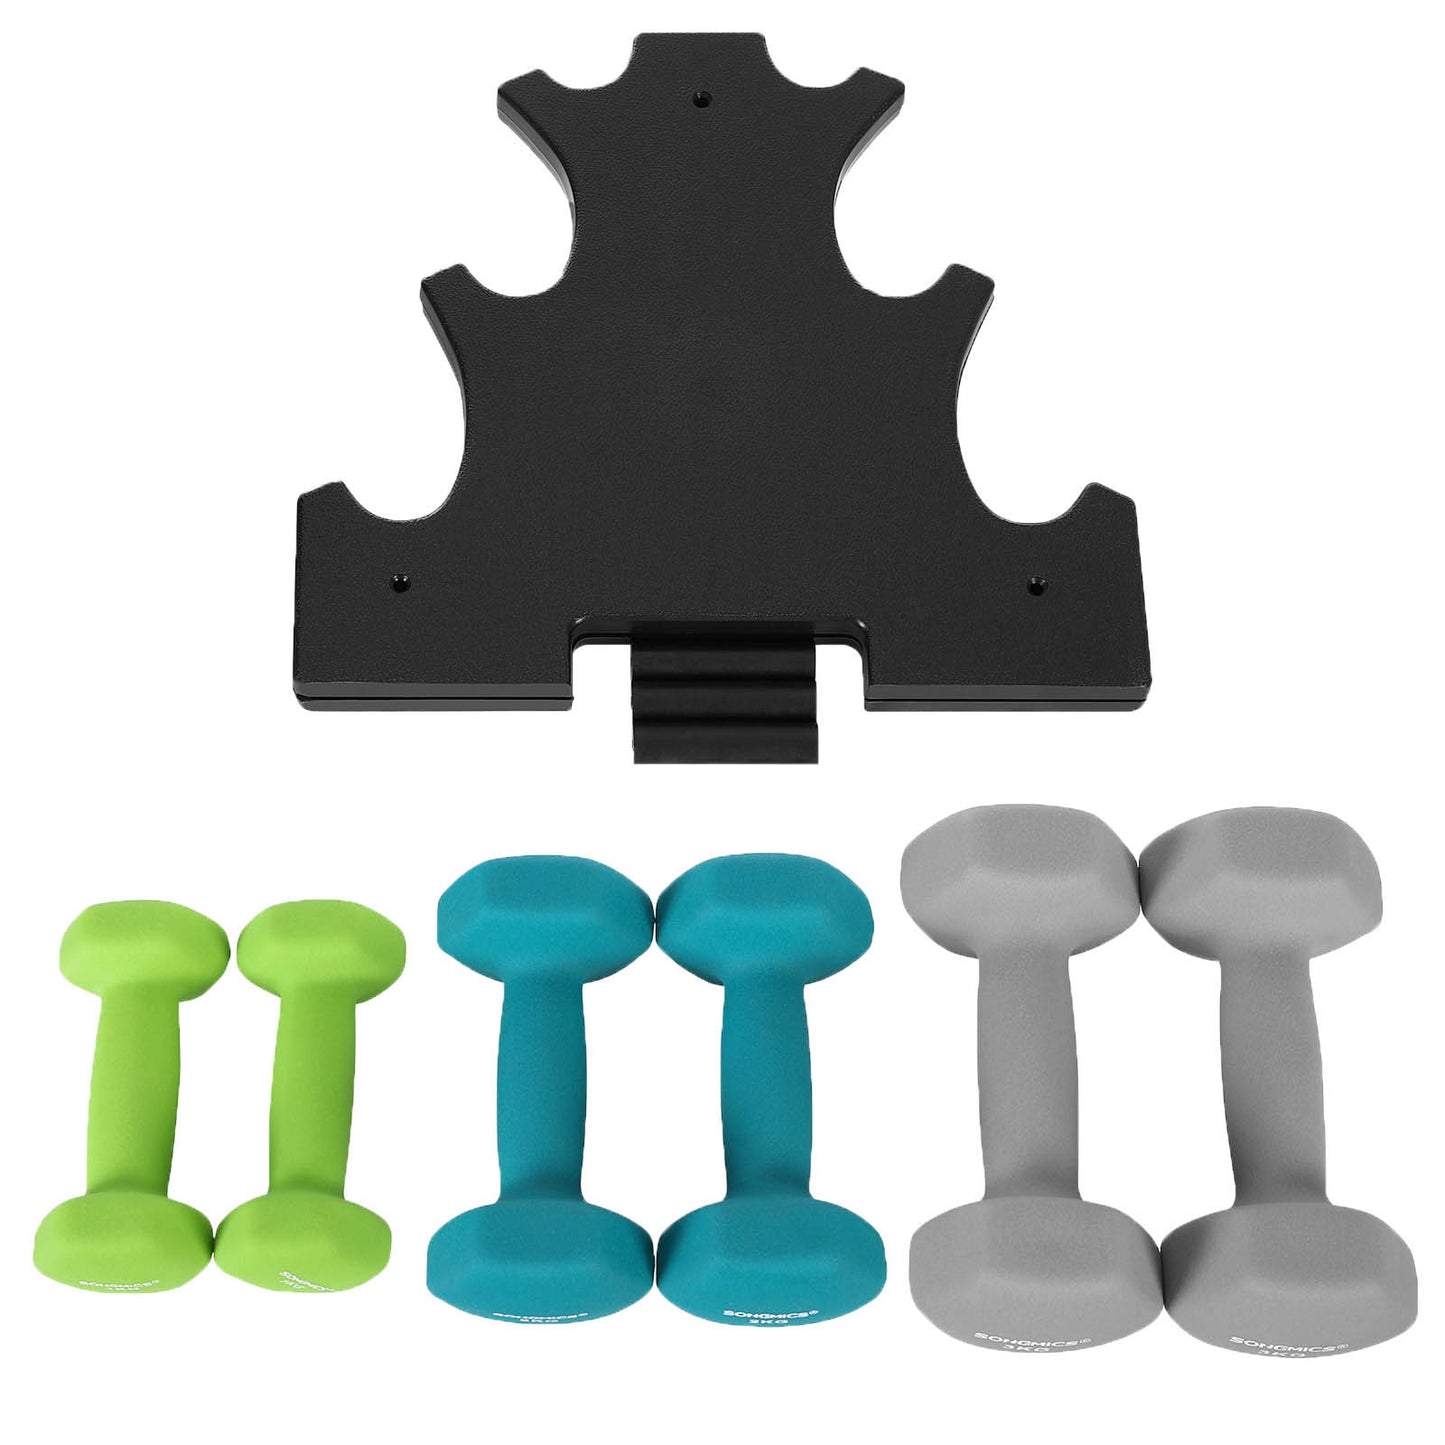 Hex Dumbbells Set with Stand - 2 x 1 kg, 2 x 2 kg, 2 x 3 kg, Lime, Teal and Grey, Neoprene Matte Finish, SONGMICS, 2